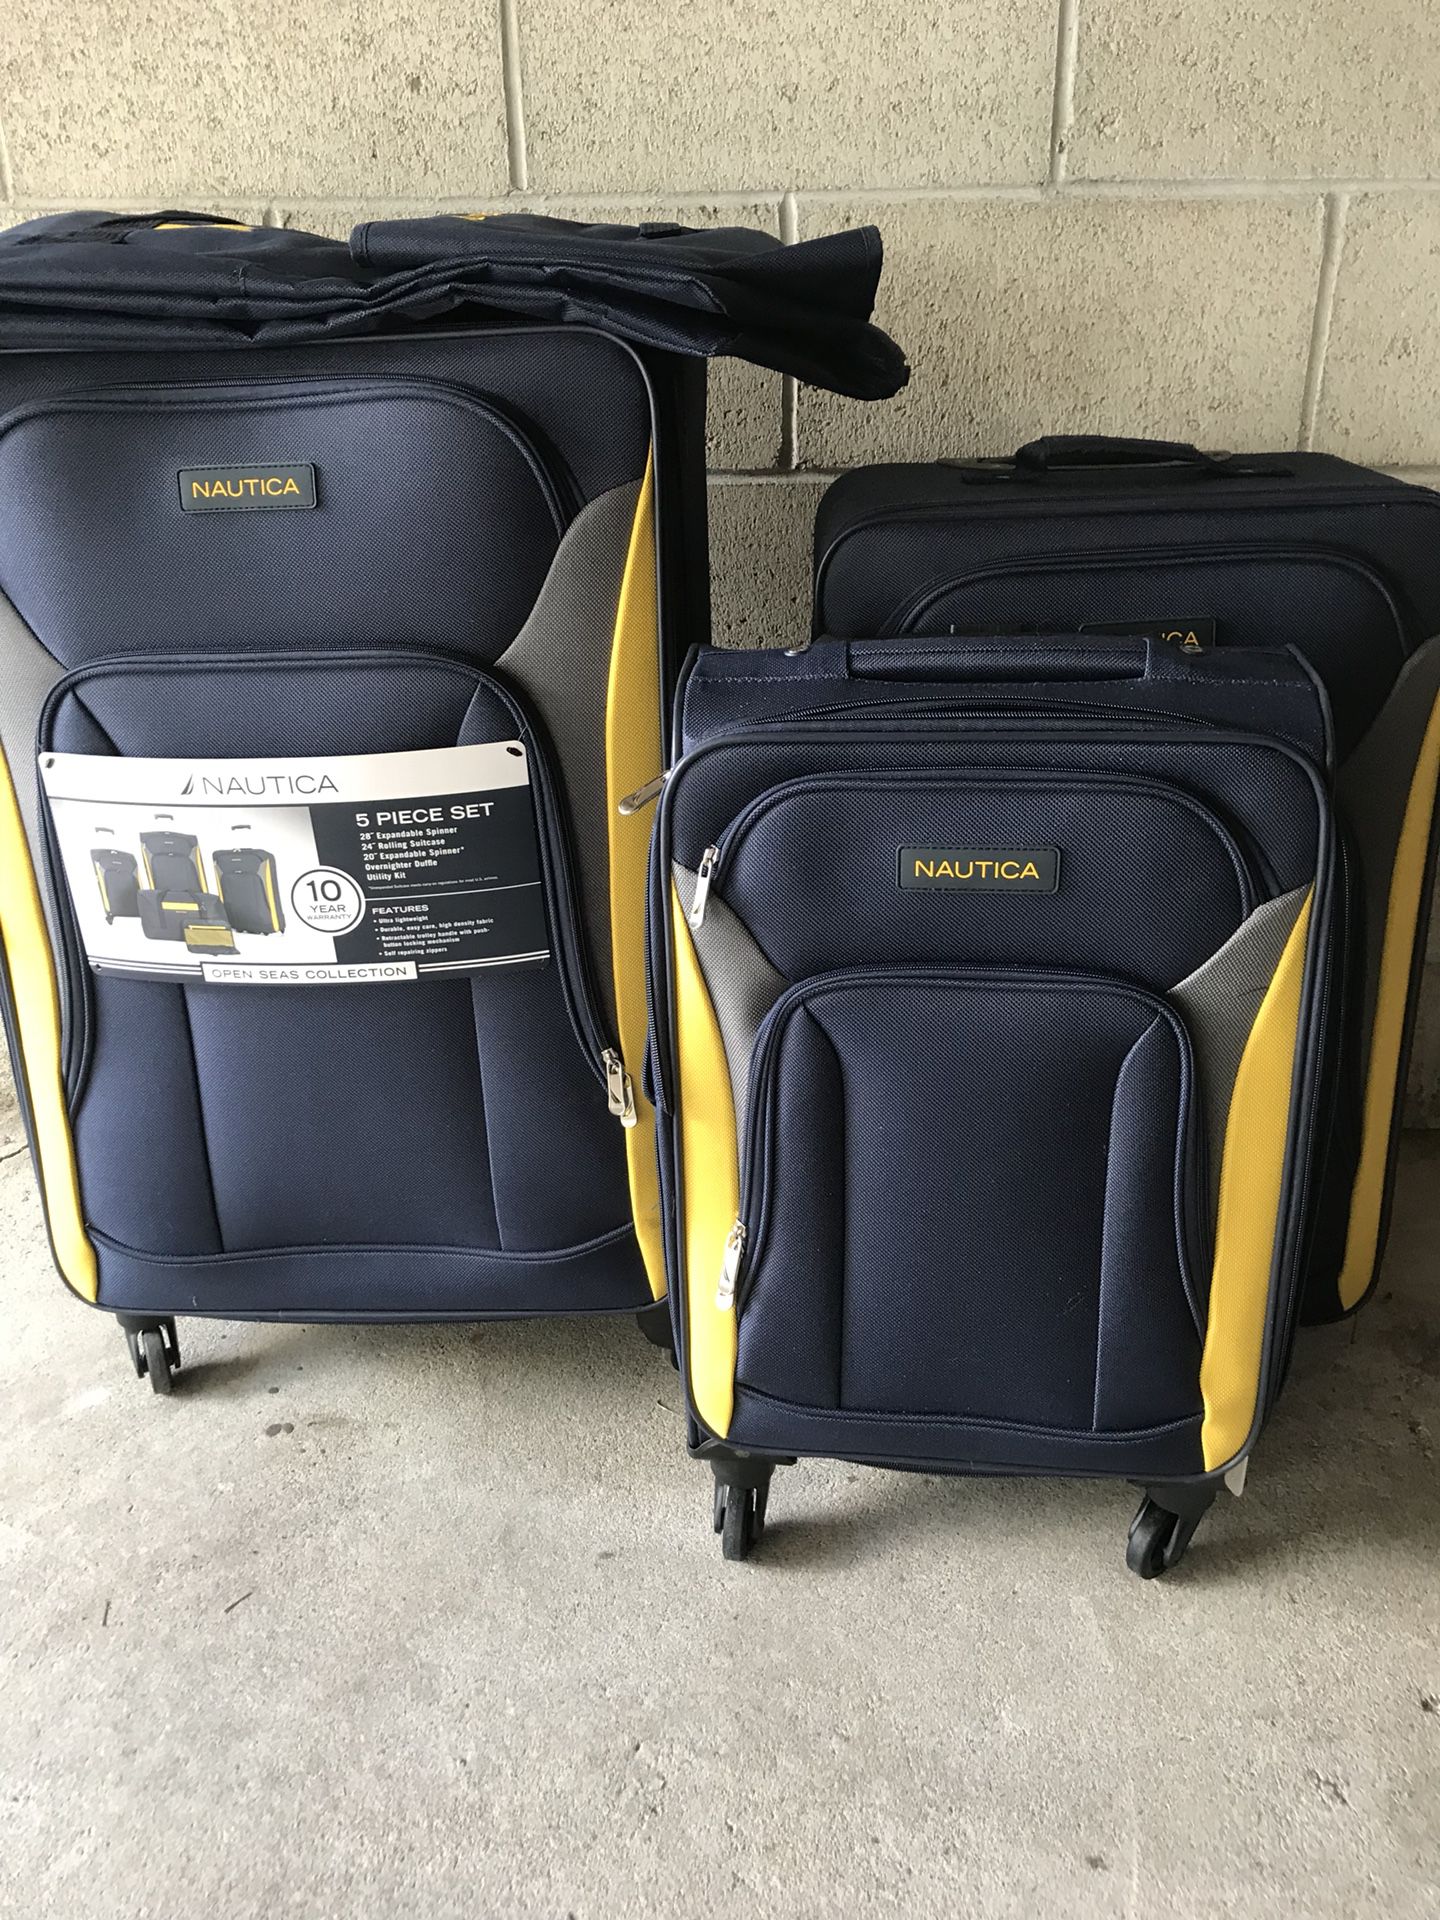 Luggage Set 3 Pieces for Sale in San Diego, CA - OfferUp